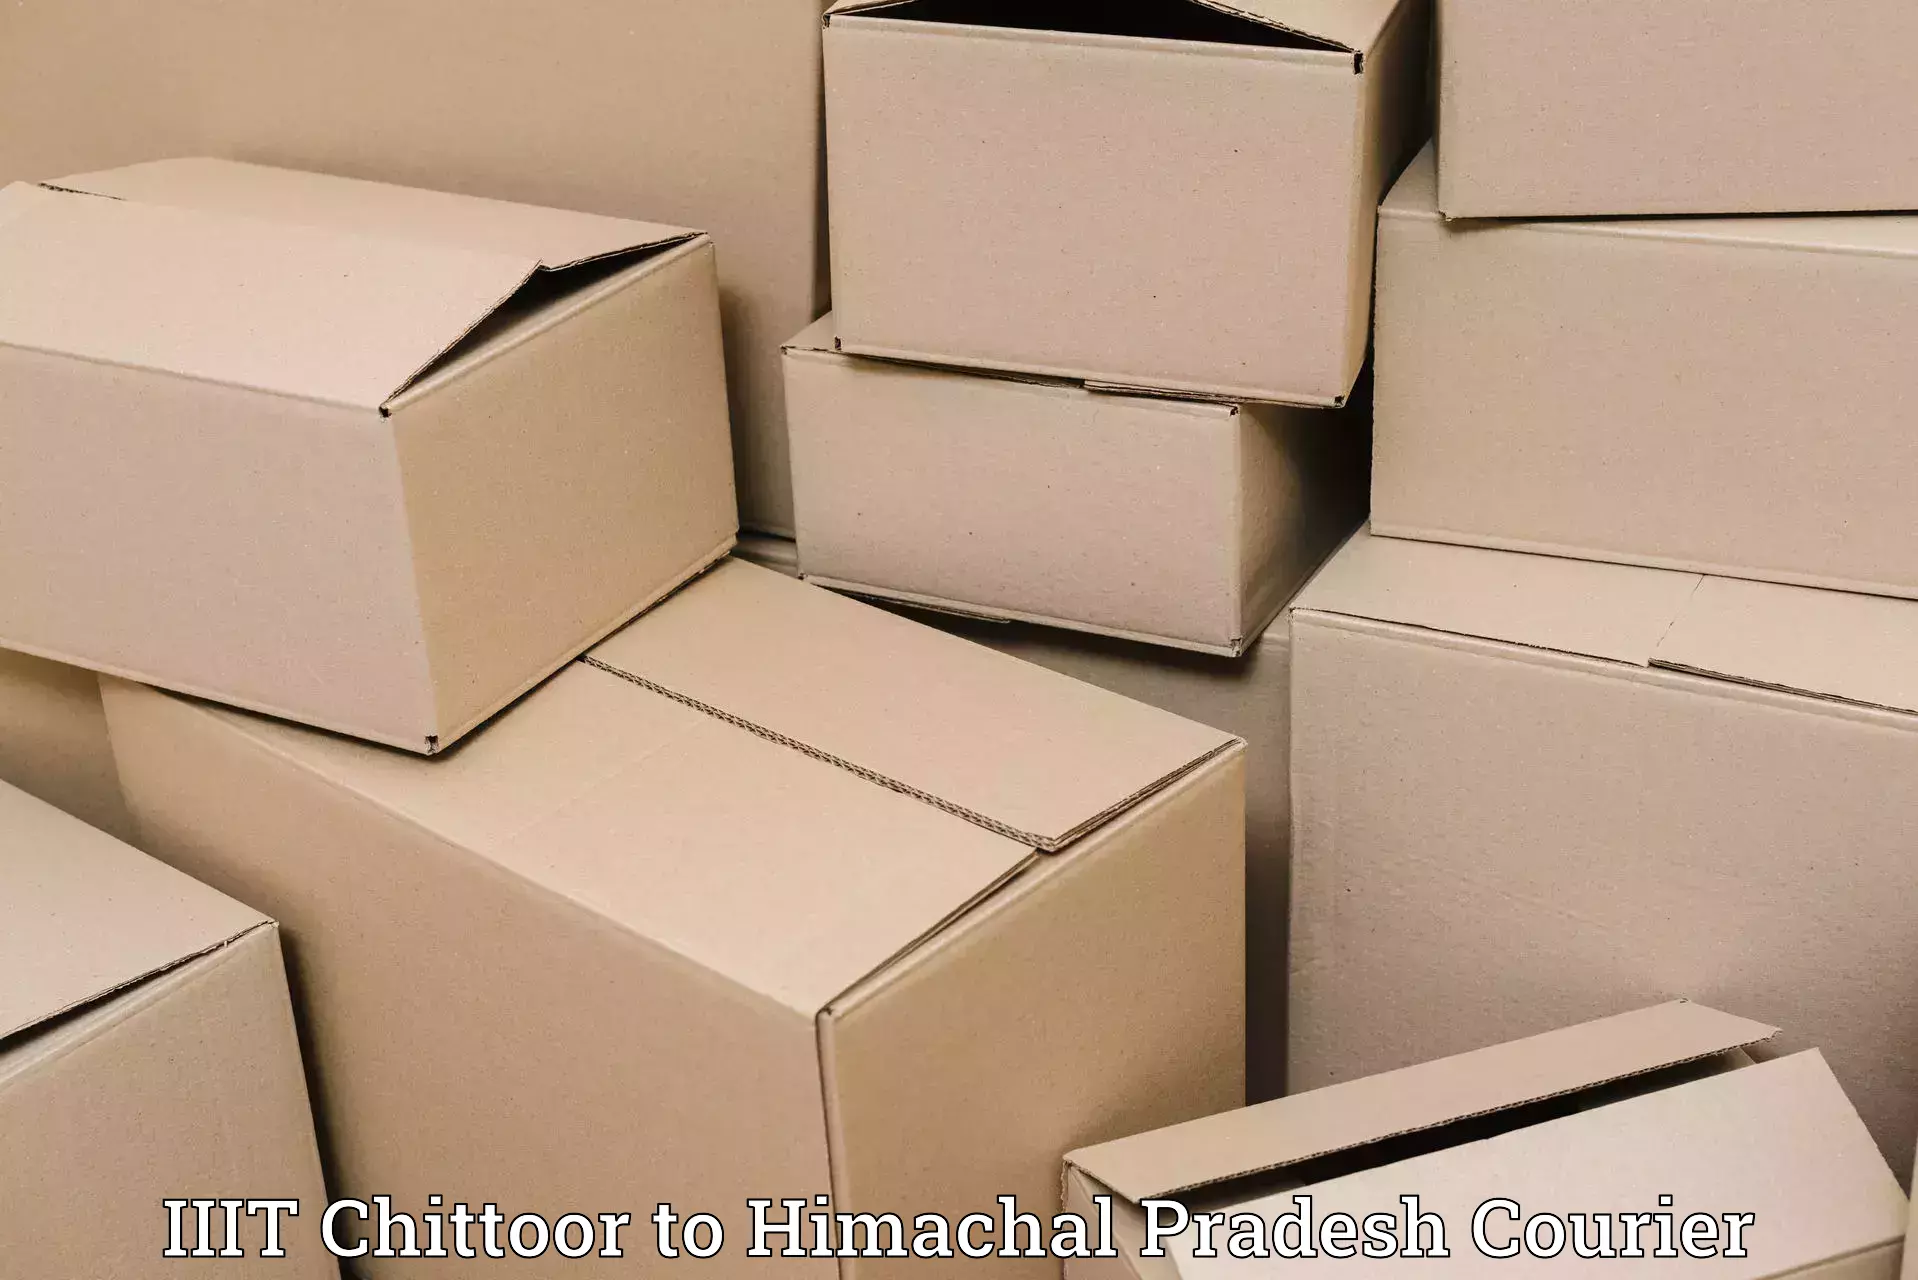 Rapid shipping services in IIIT Chittoor to Shimla